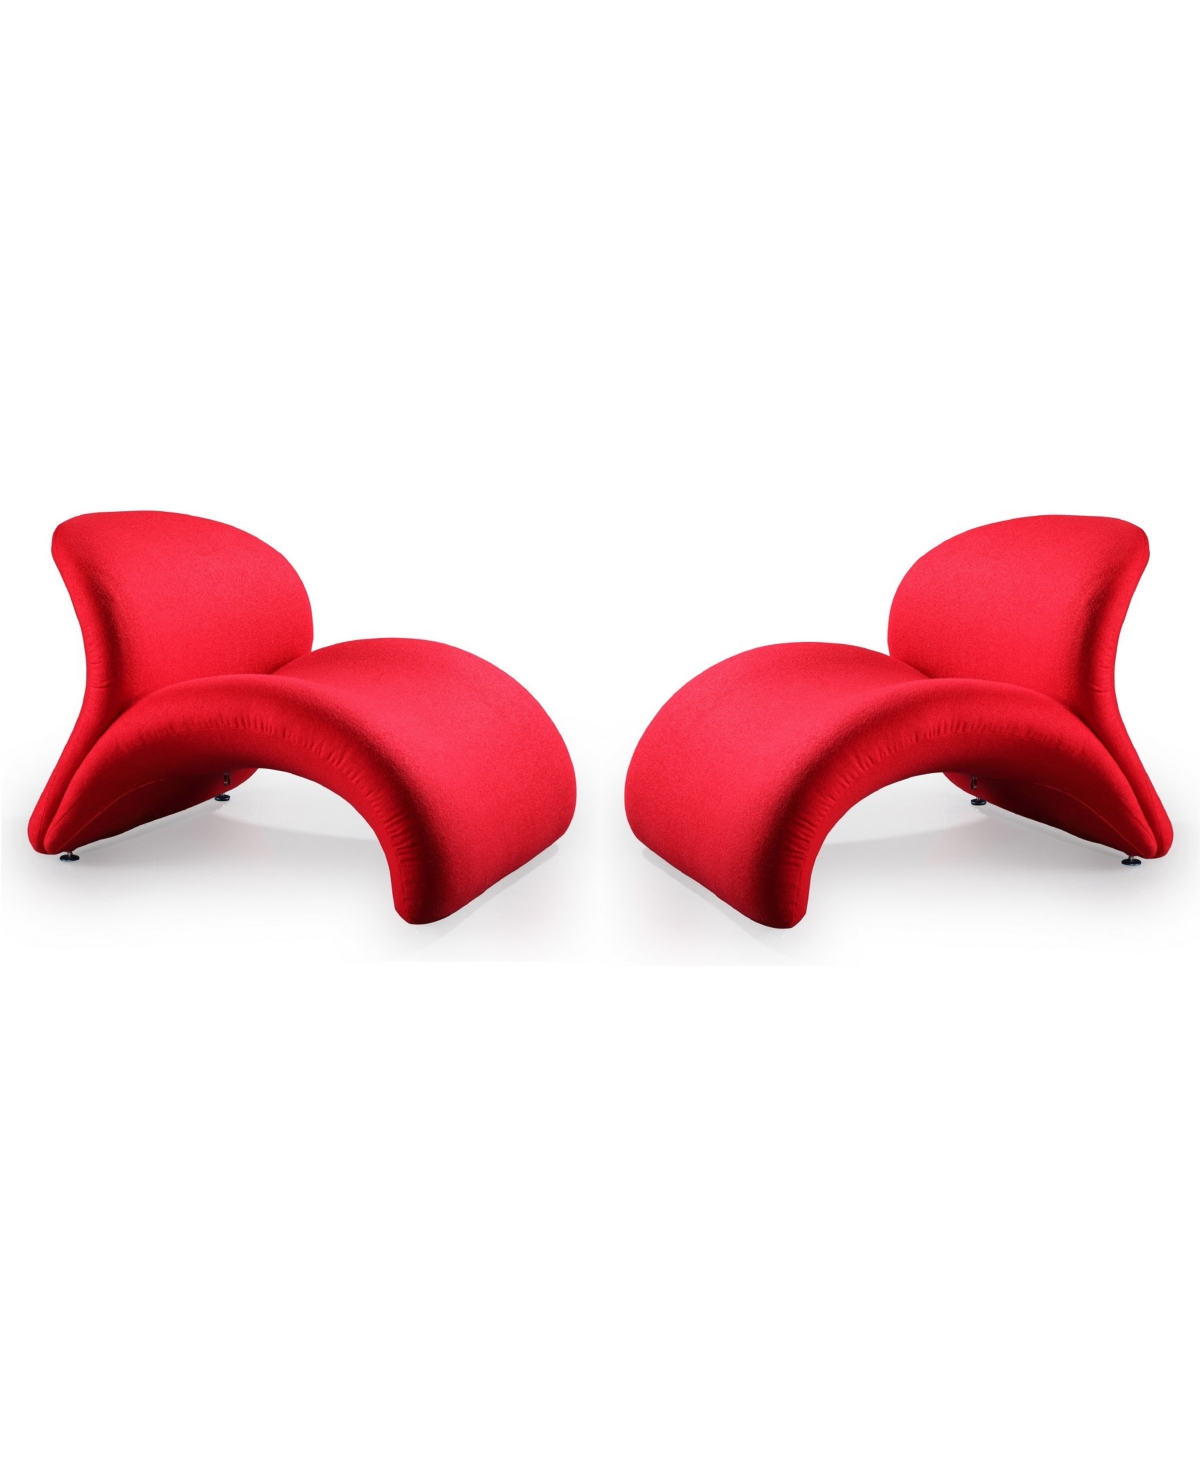 Manhattan Comfort Set Of 2 Rosebud Accent Chairs In Red